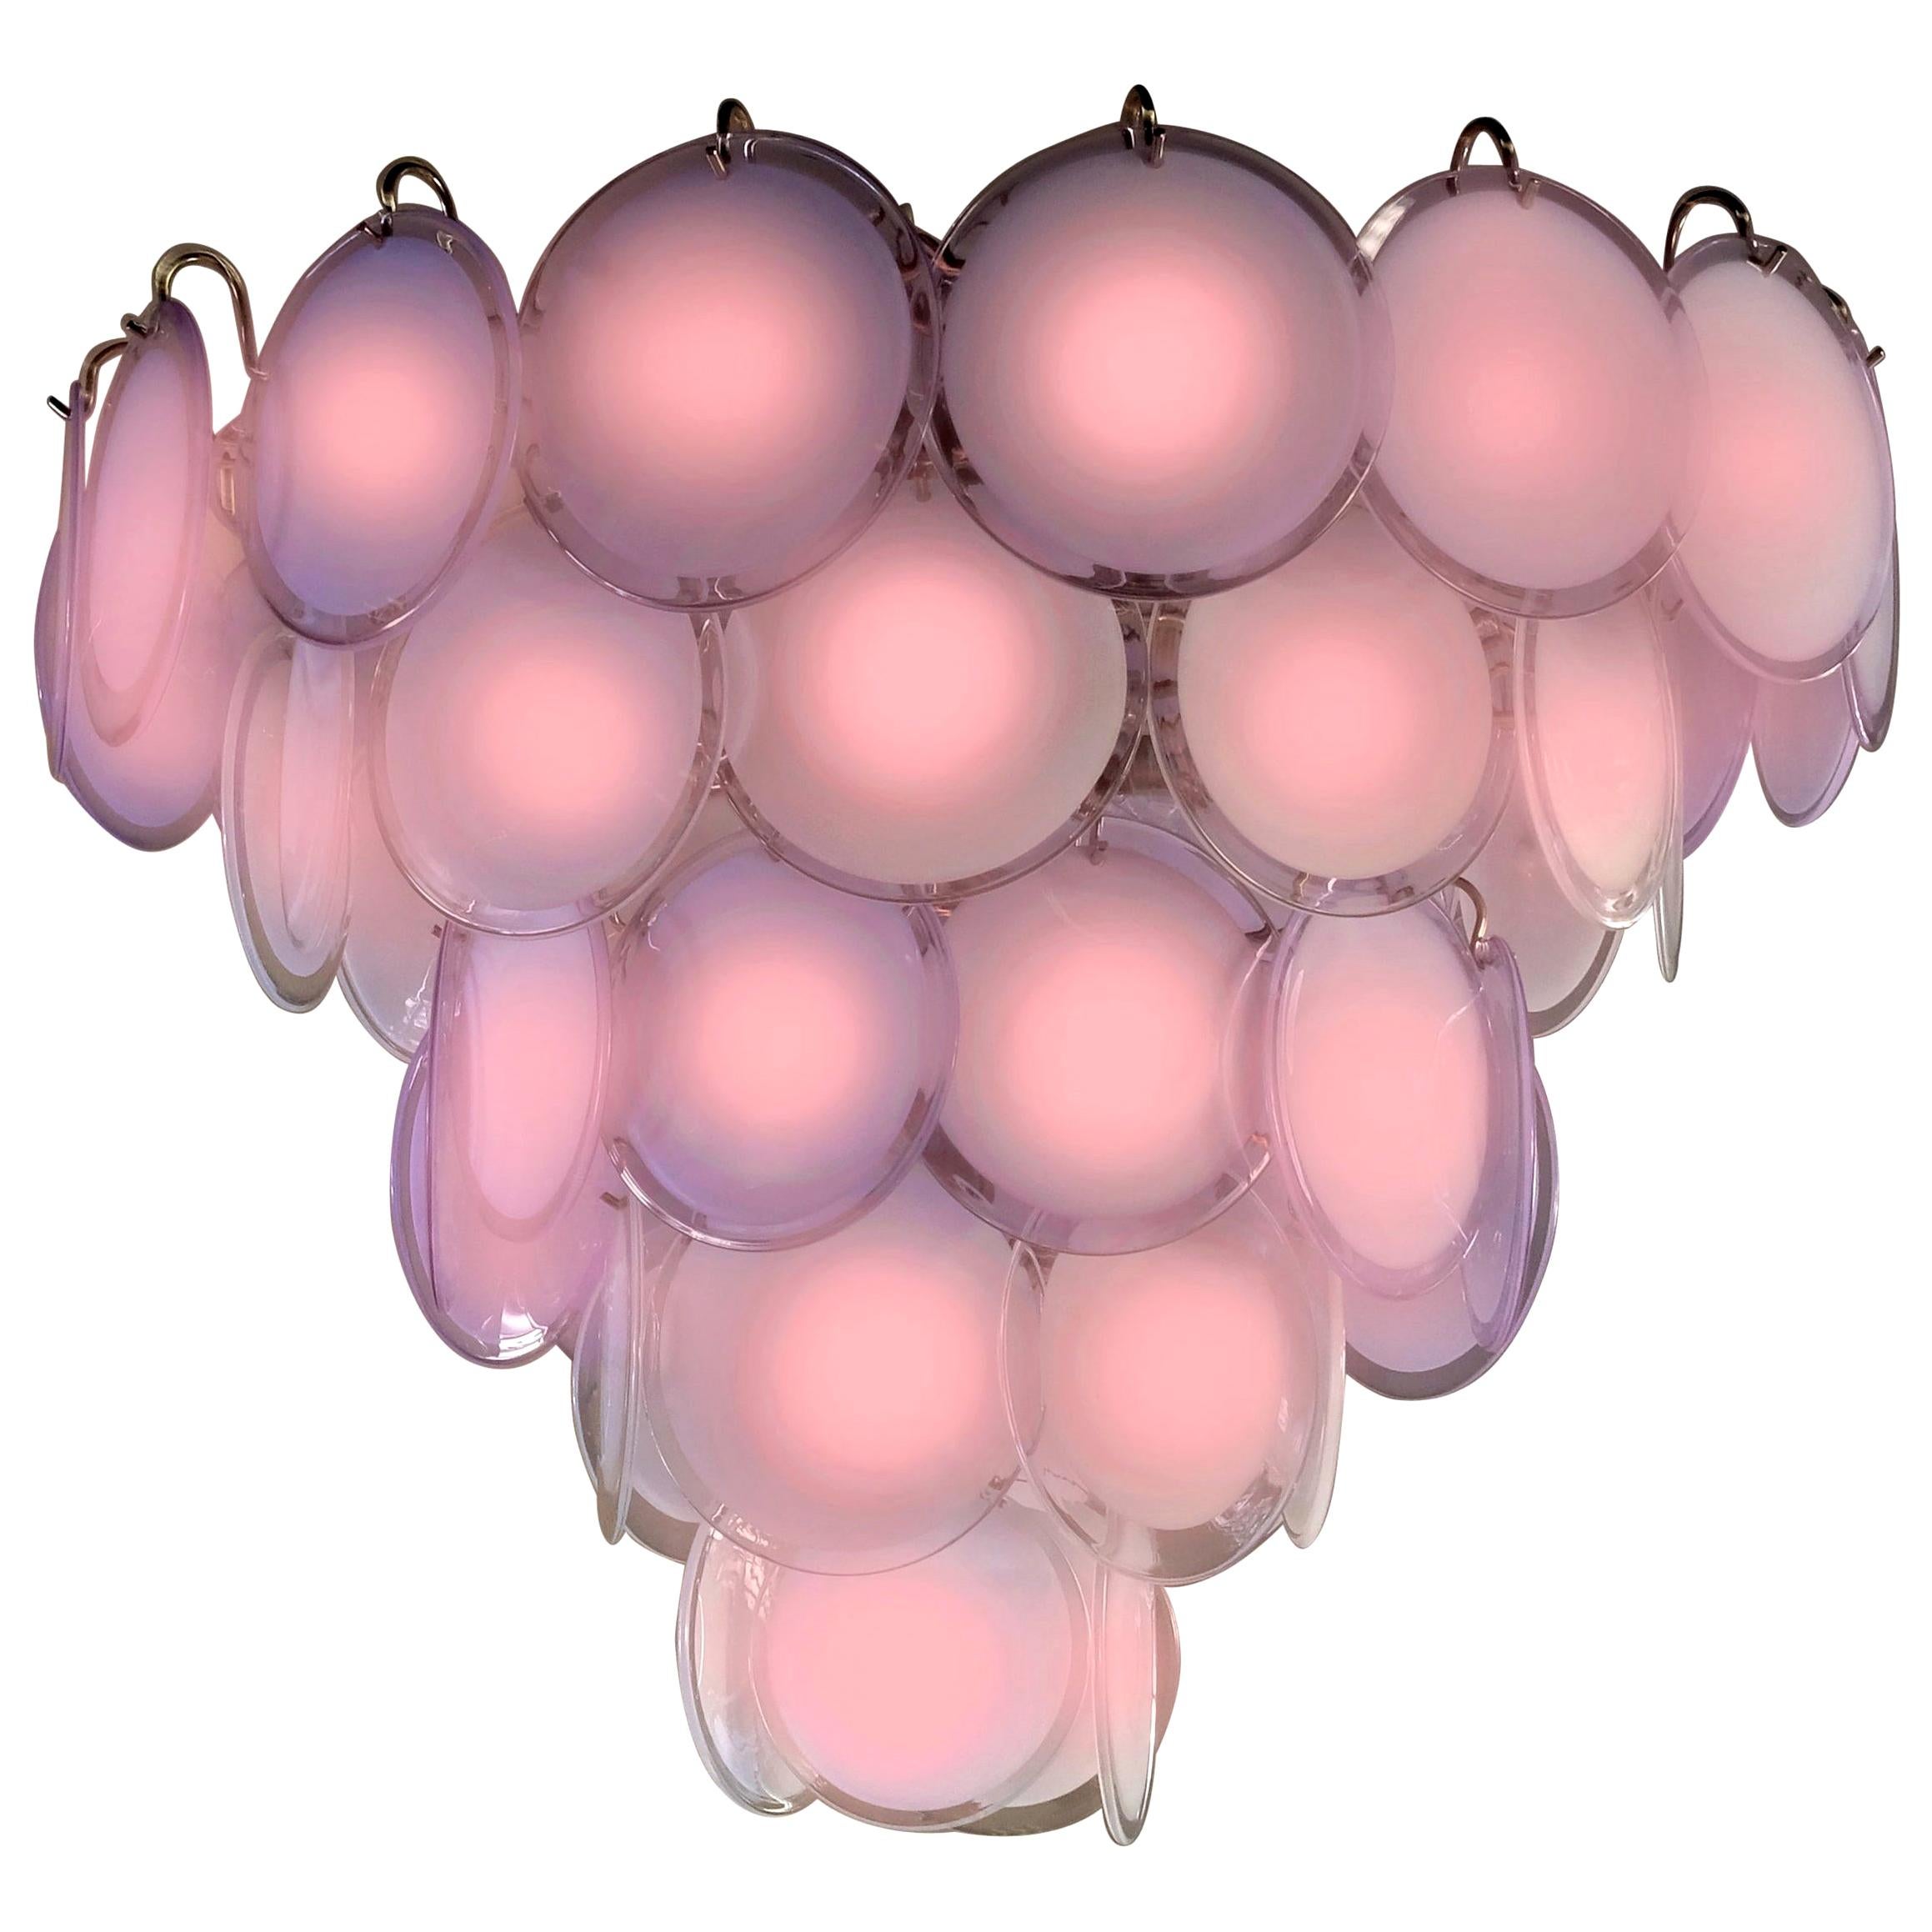 Spectacular chandelier by Vistosi made with 50 pink Murano discs.
16 E 14 light bulbs. We can wire for your country standards.
Available also a pair of small 24 disc chandelier and four pairs of sconces.